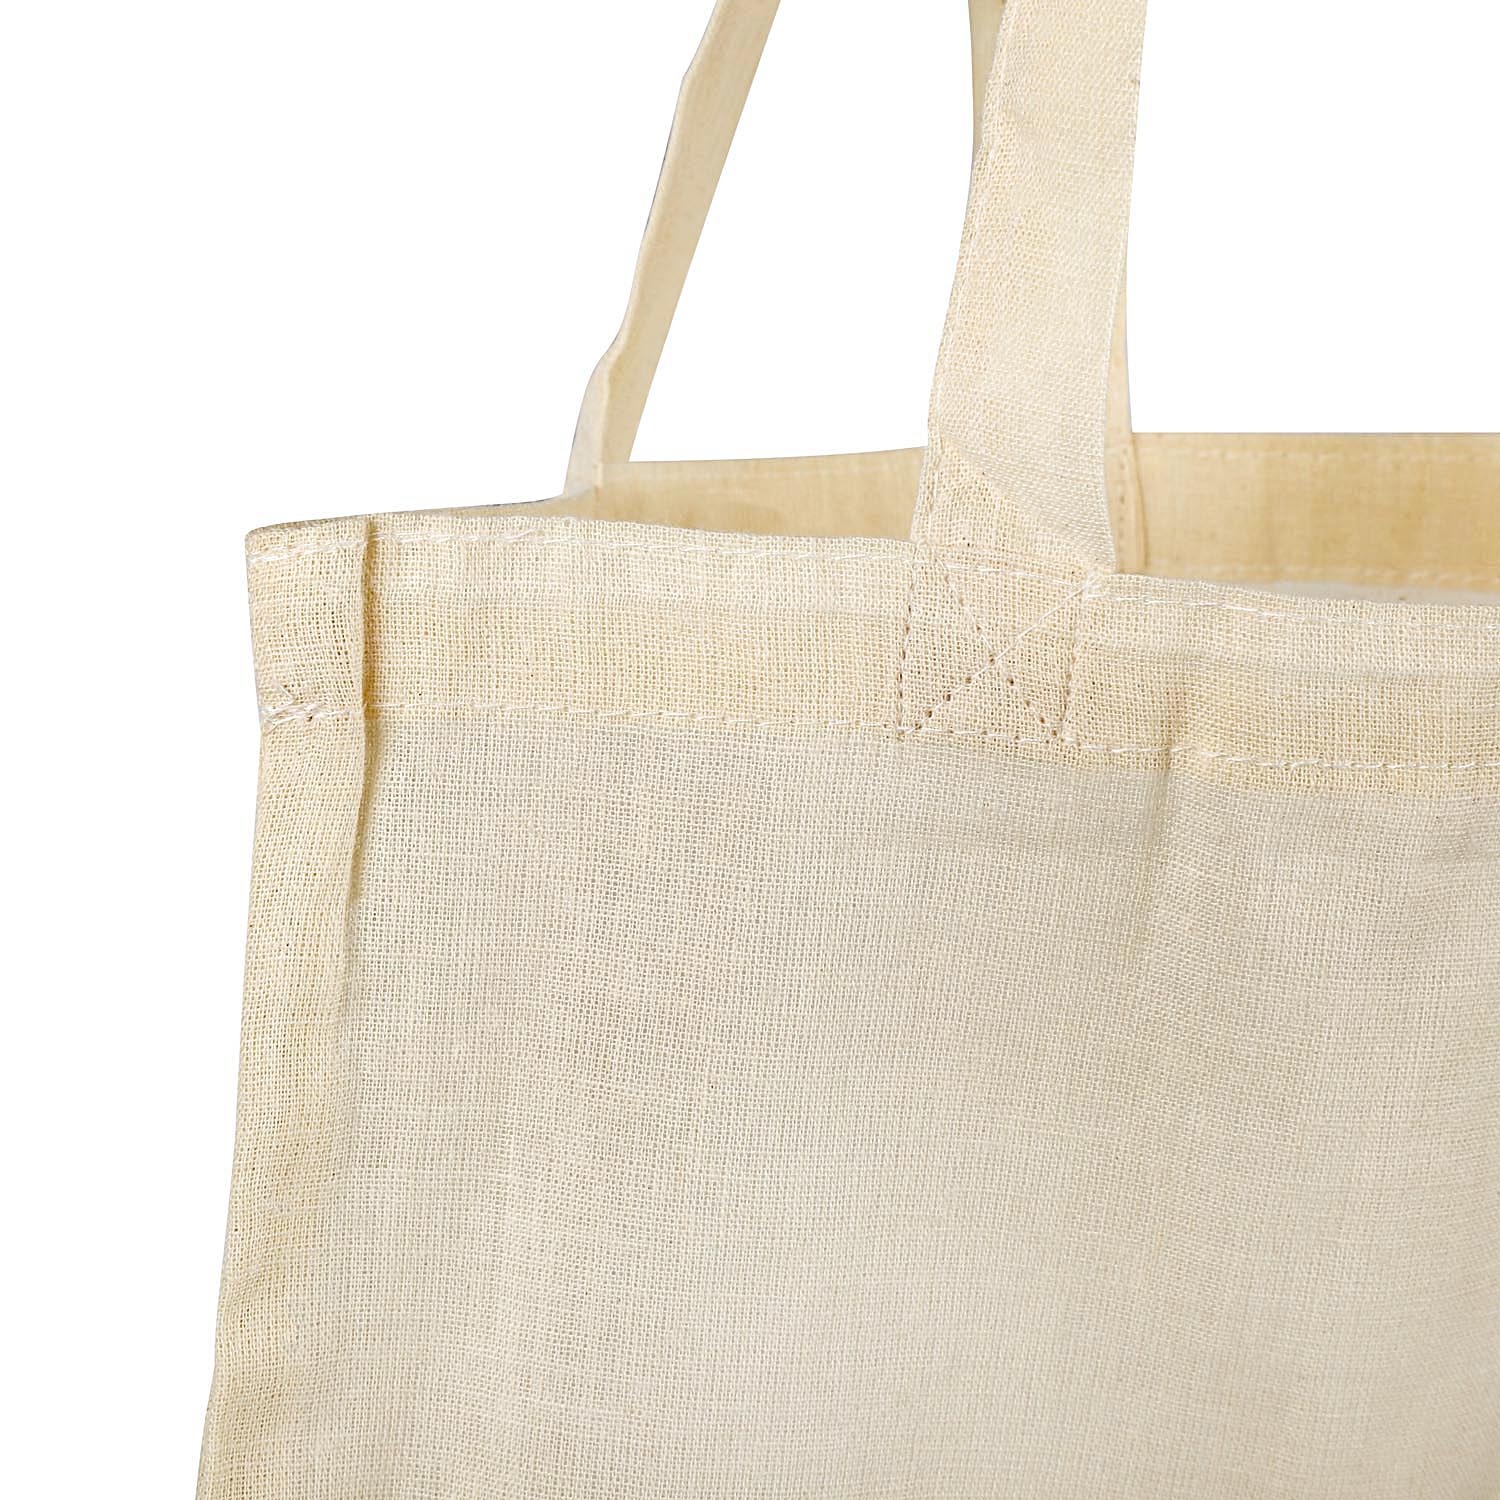 10 different types of HANDMADE BAGS - The Stitch Company